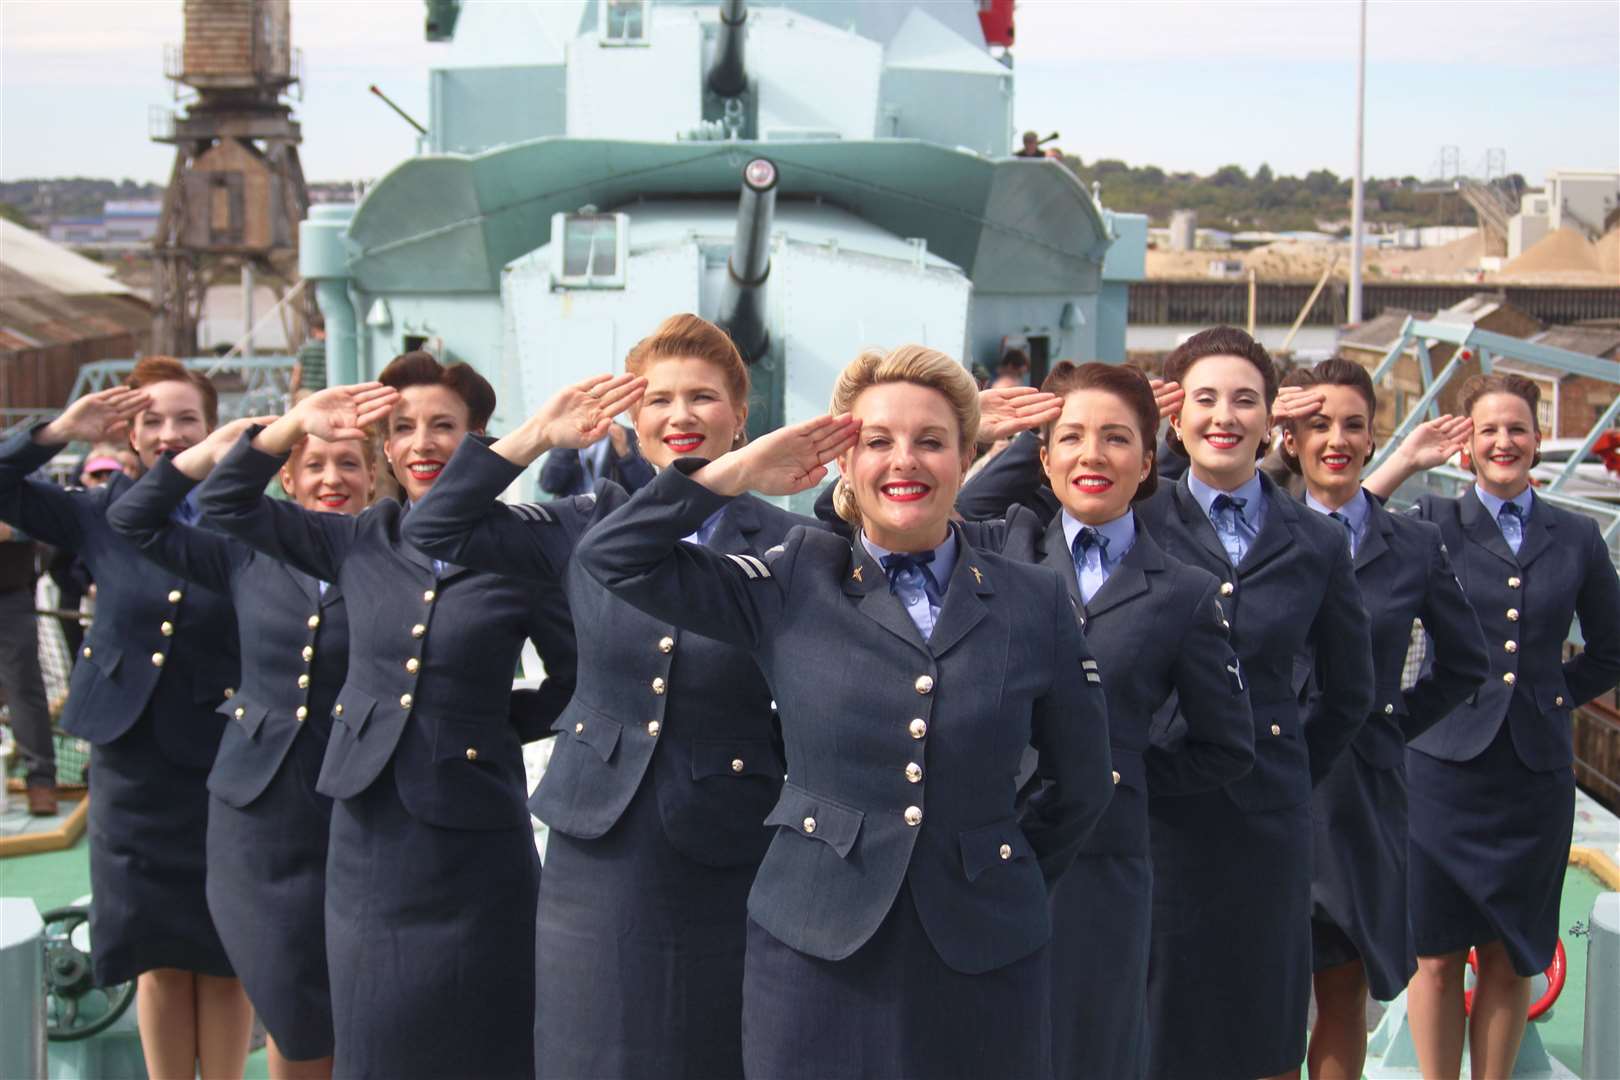 Vintage festival Salute to the '40s returns to the Historic Dockyard Chatham this September